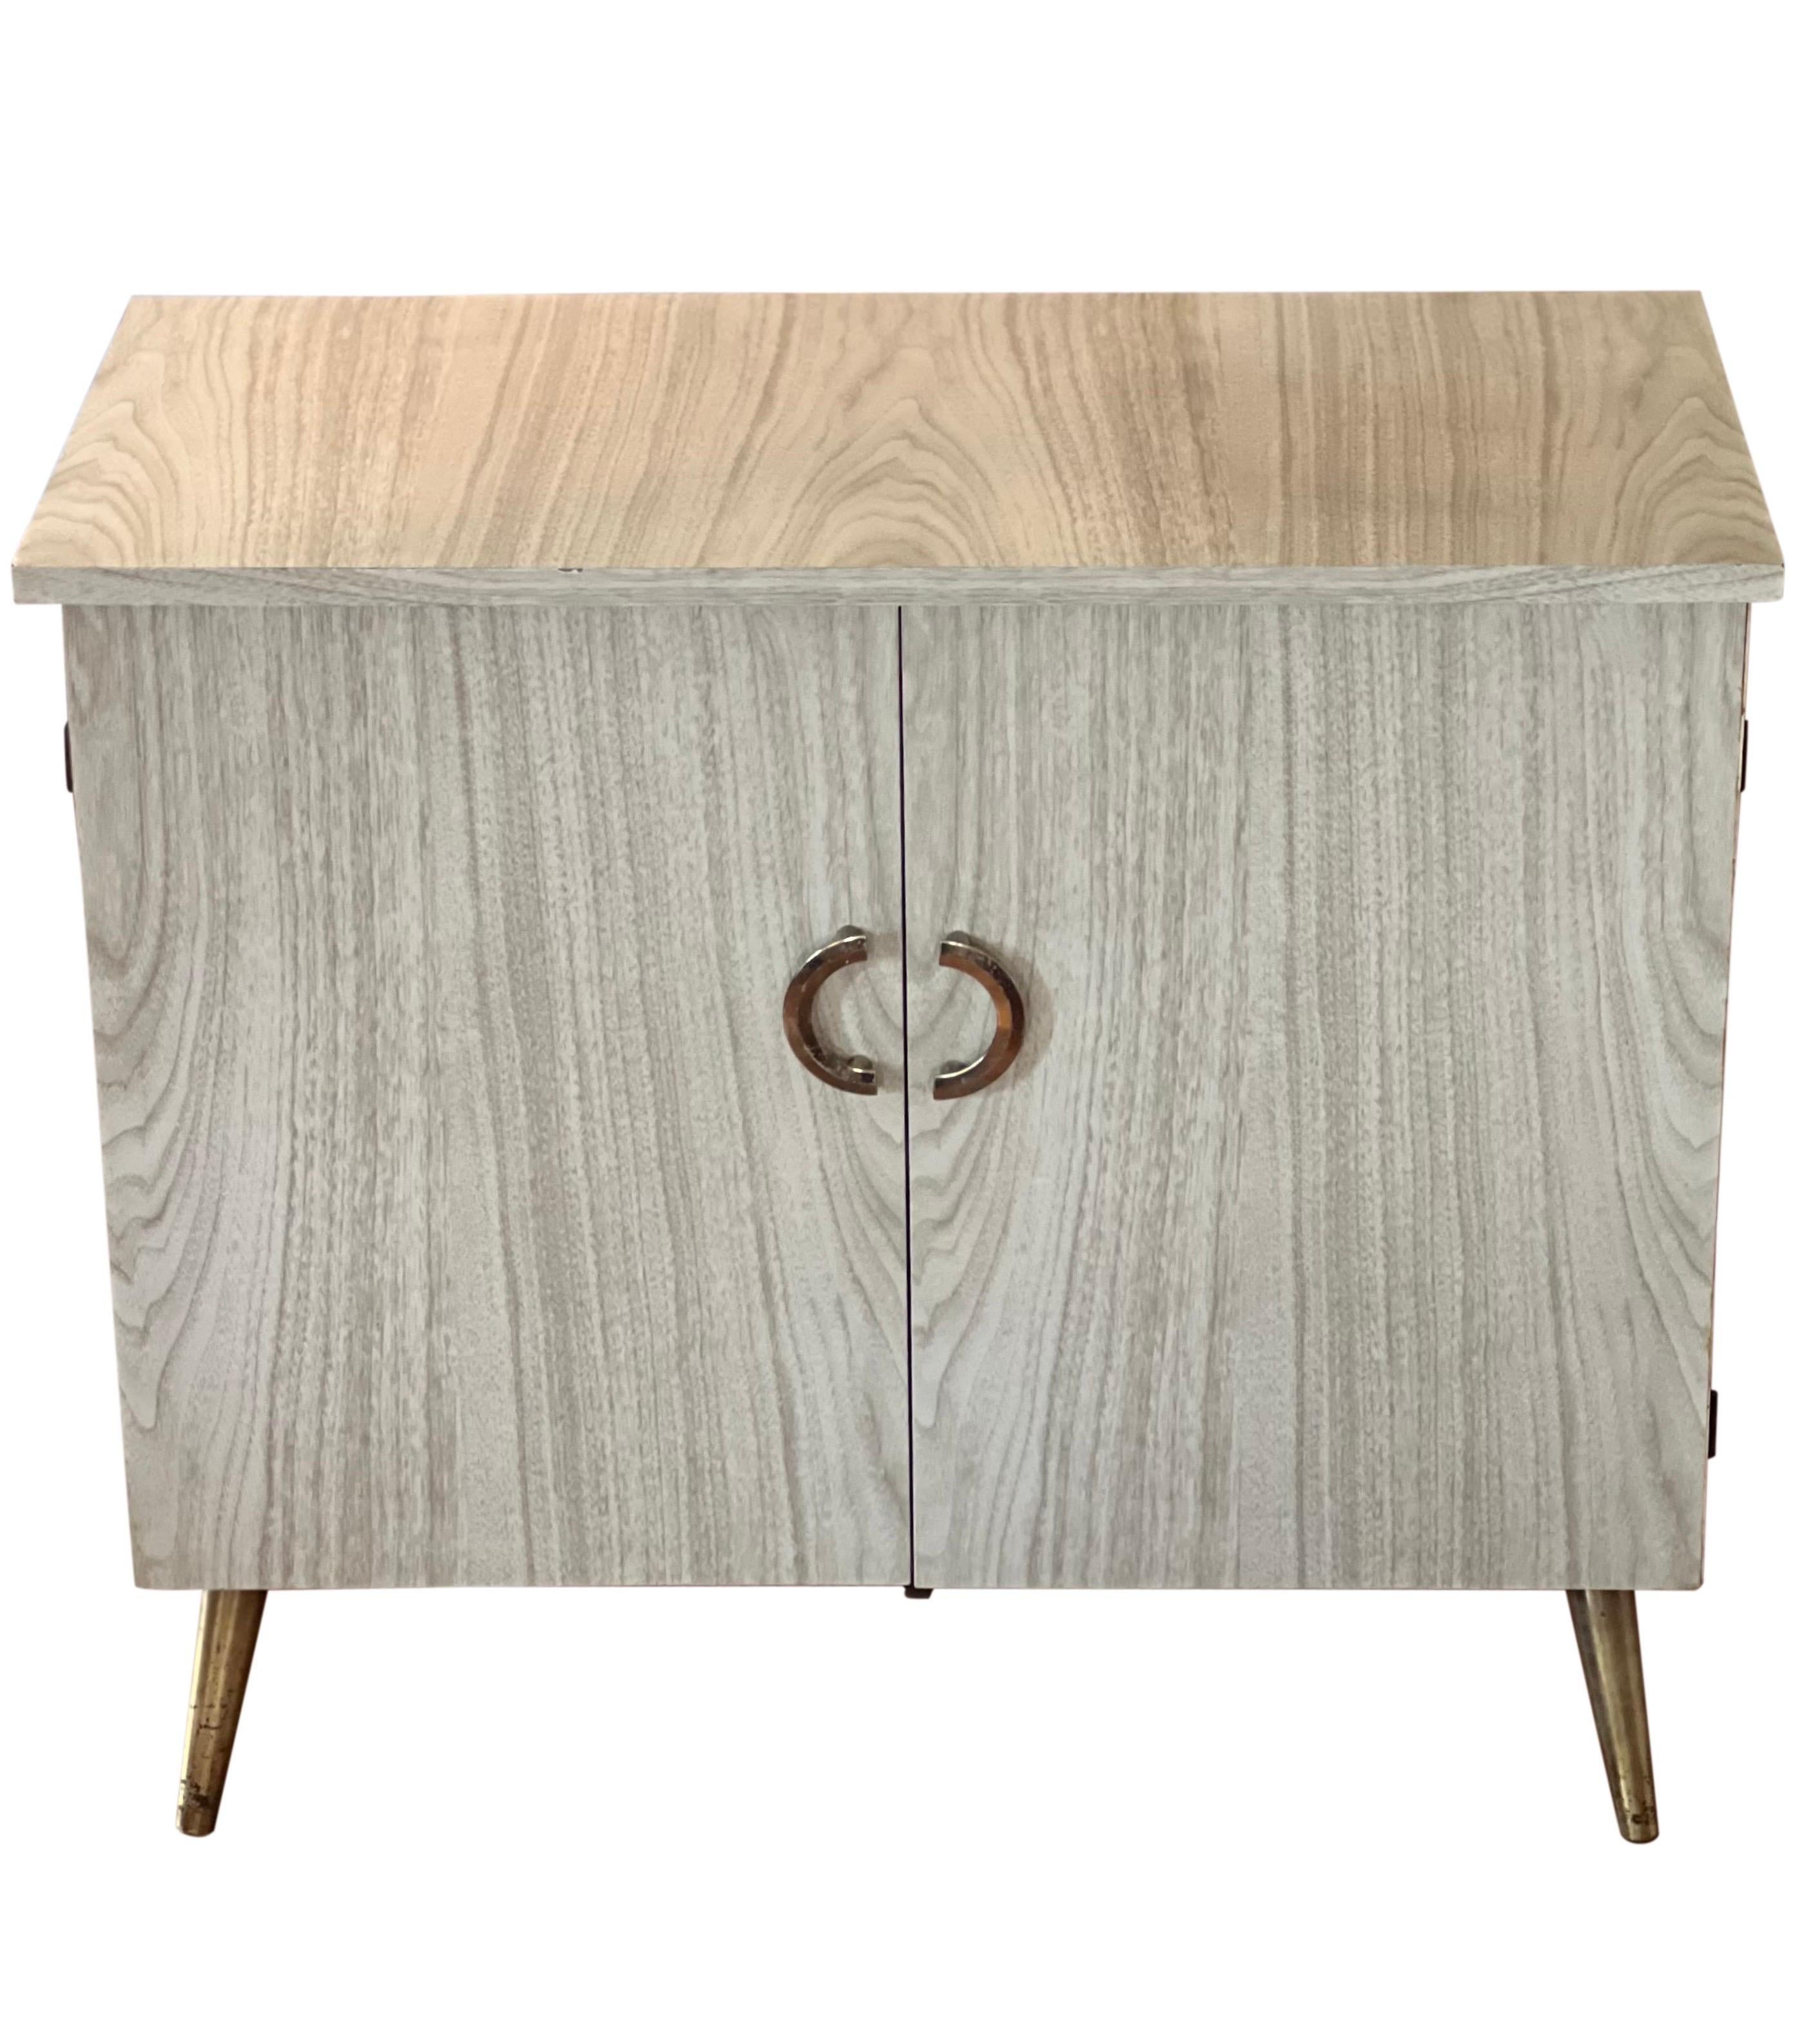 Wonderful vintage mid century modern laminated small sideboard or cabinet.  

This versatile cabinet is a practical  size and may be useful in any room.  With classic mid century modern design, it features two cabinet doors with brass half moon